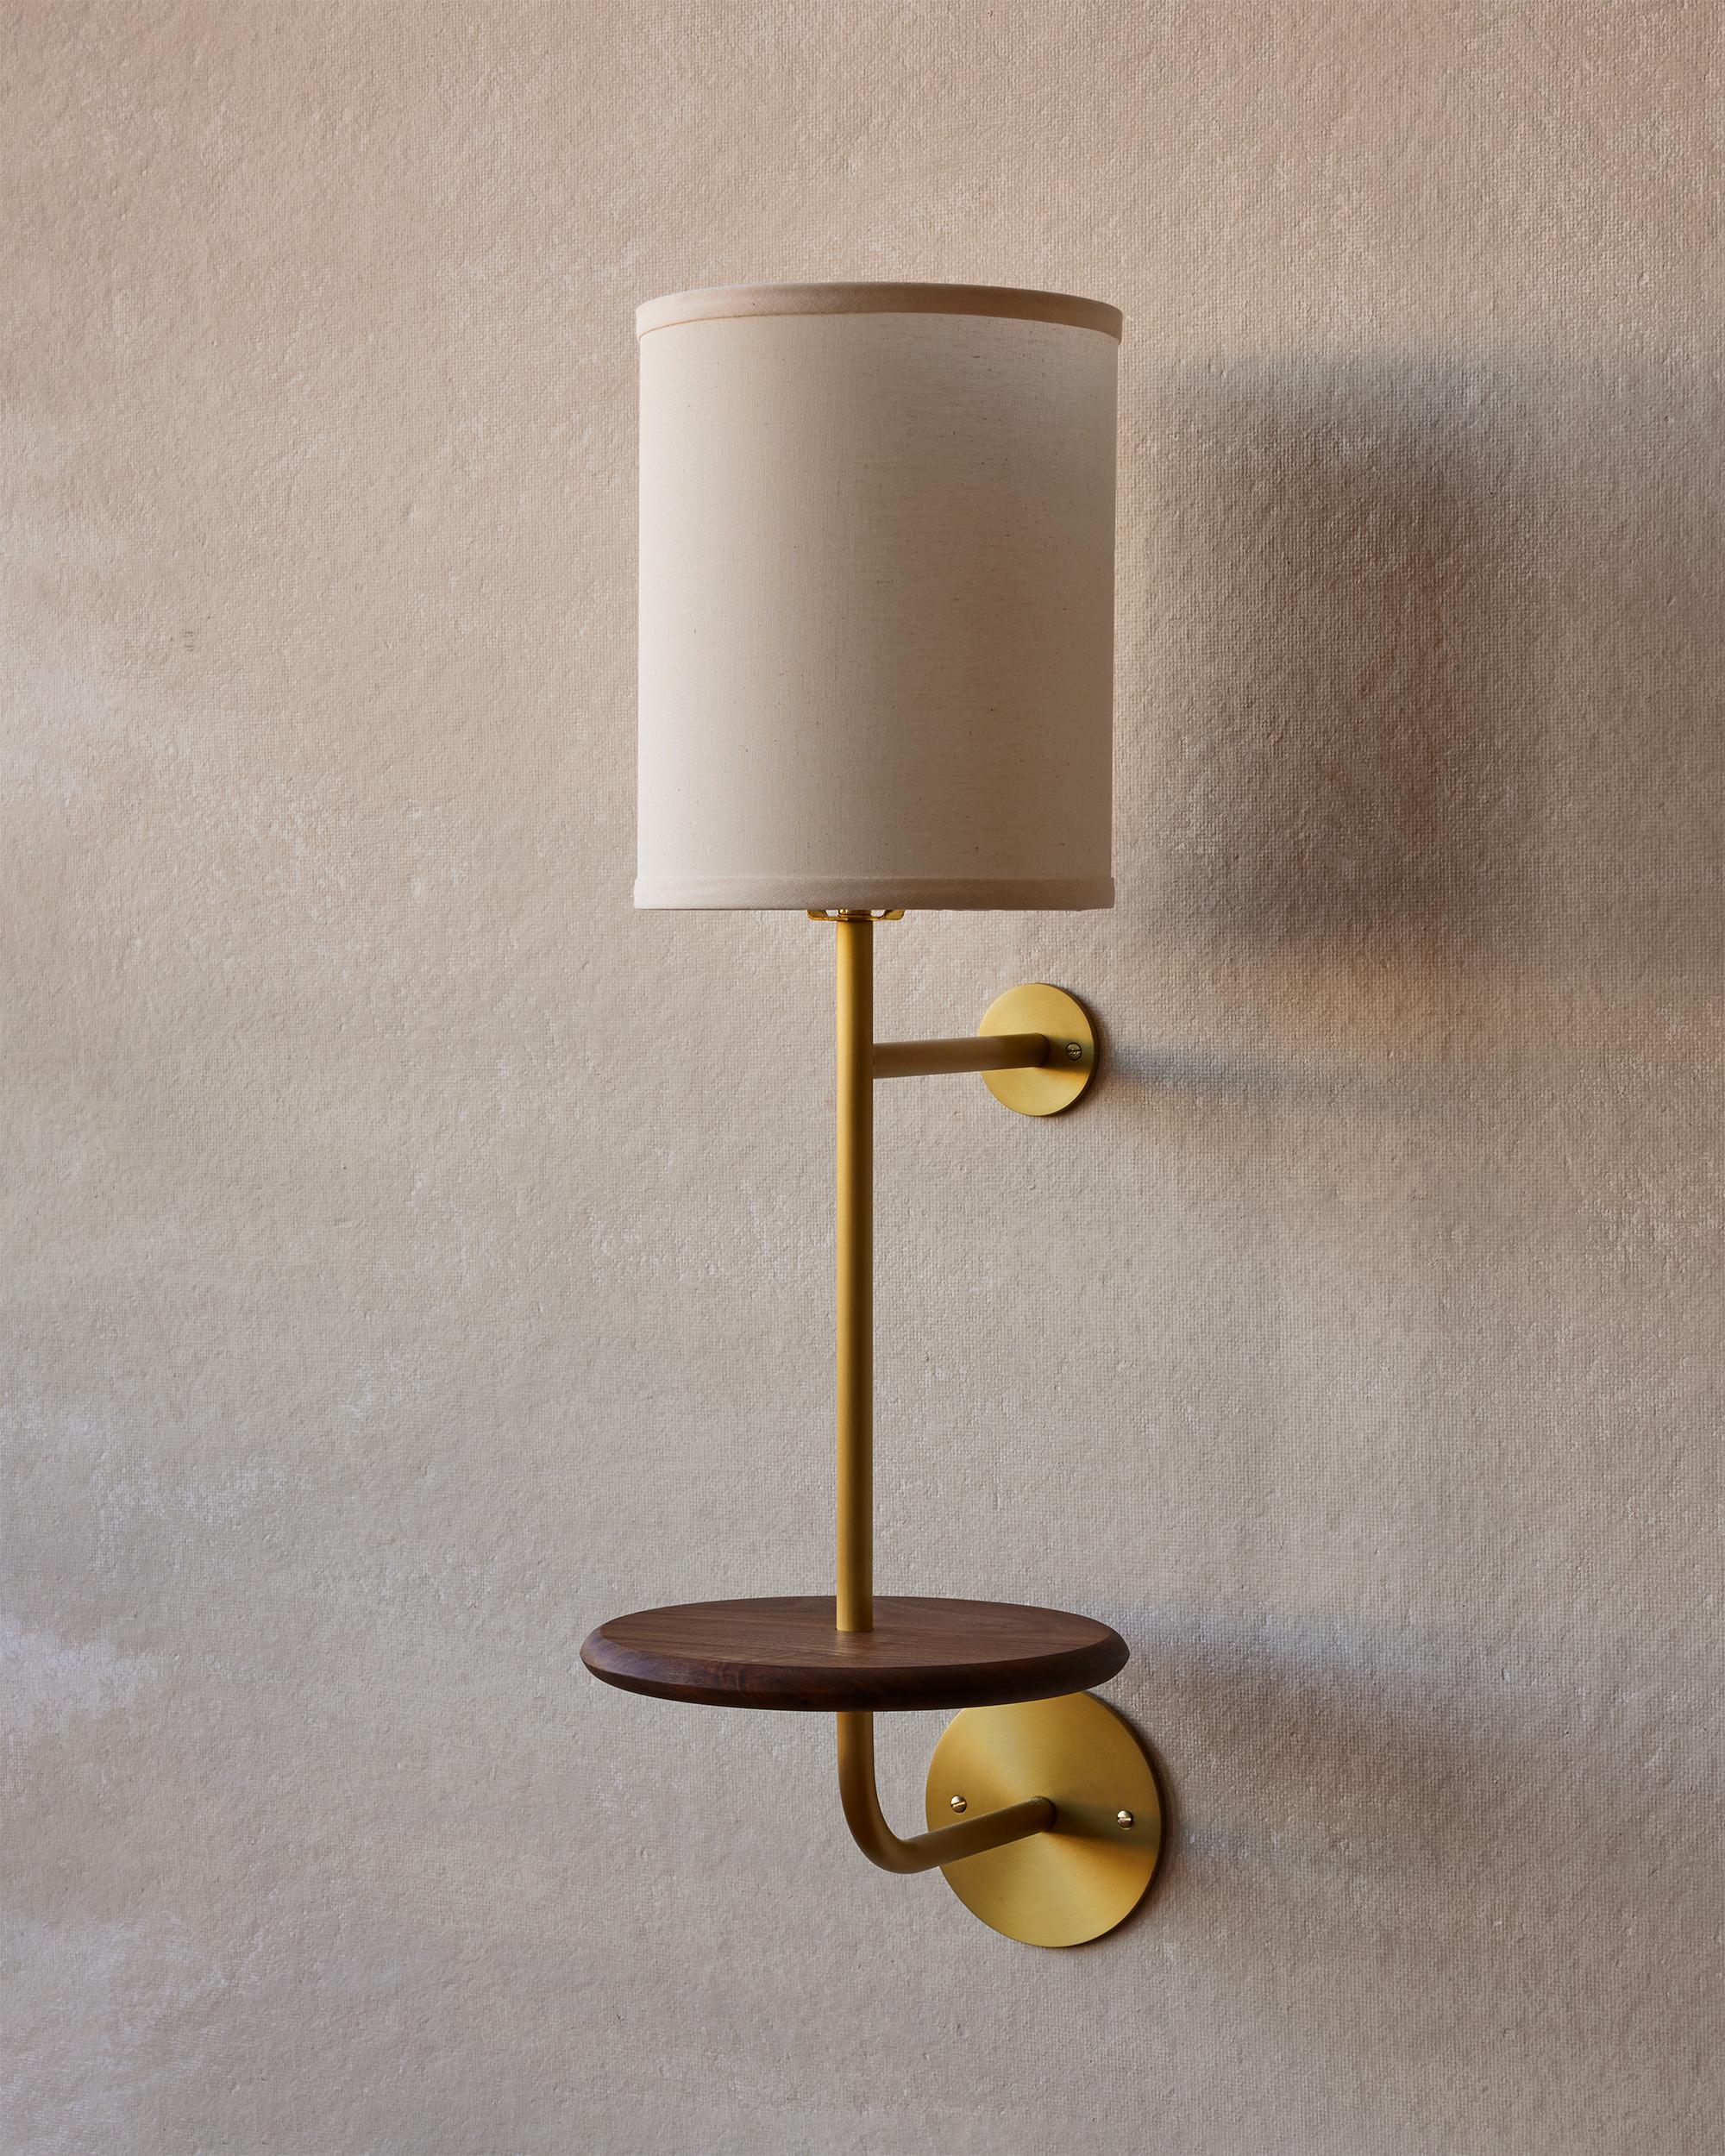 Midcentury inspired satin brass sconce with black walnut shelf. A nod to midcentury lines, the Gustav Sconce is a shining example of balanced design. The rounded satin brass body creates a graceful contour capped with a textured natural Belgian